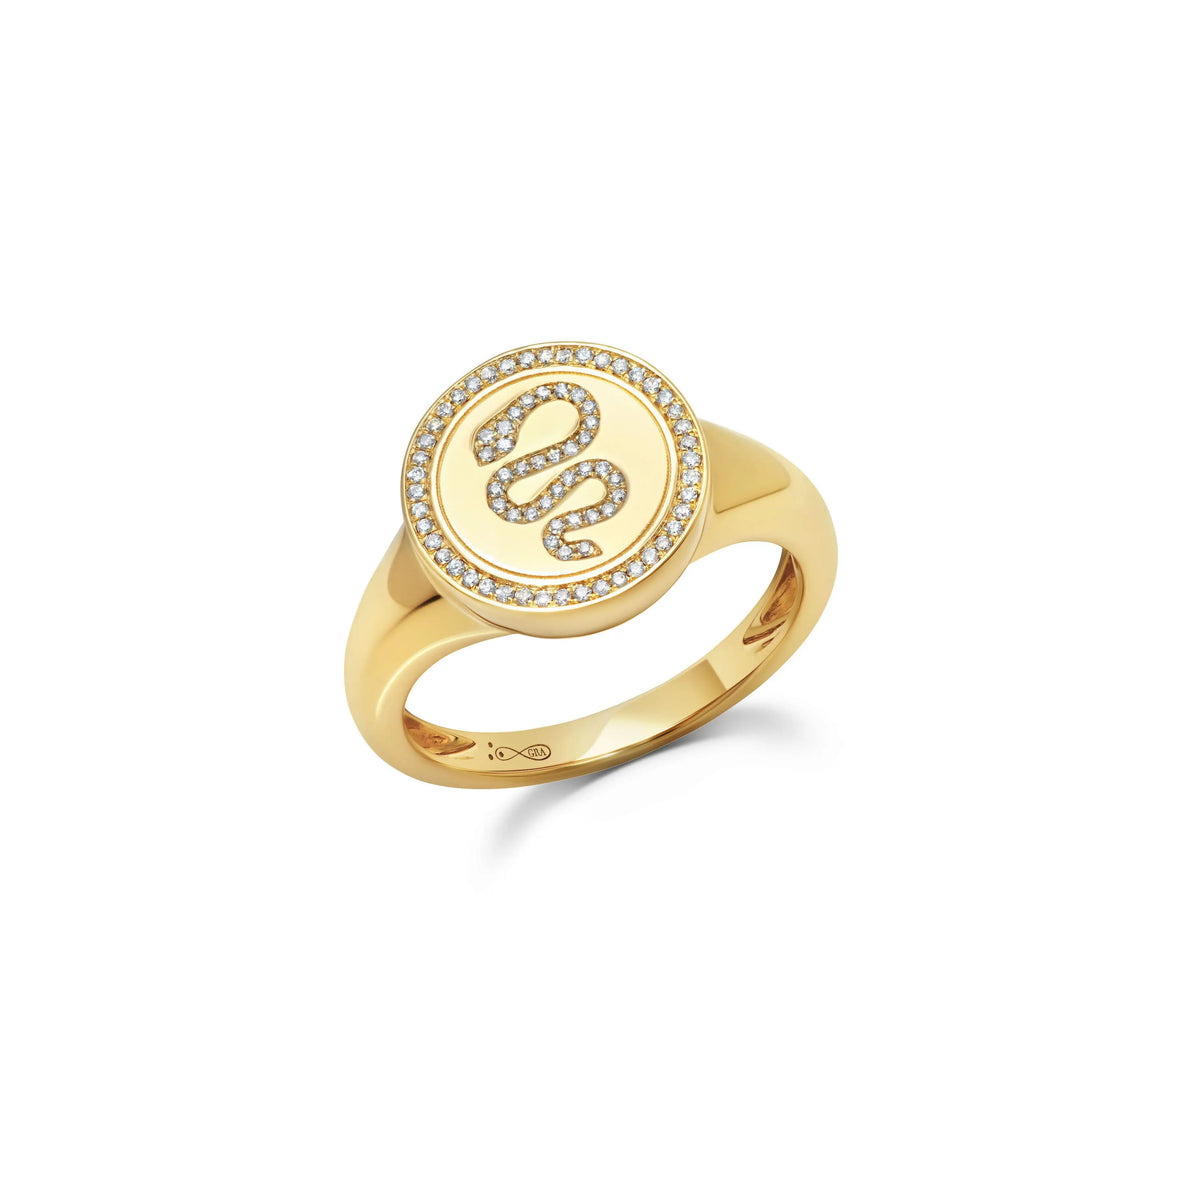 14k yellow gold ring with .21 cttw diamond snake ring  Your Choice of .21cts of G-H Color White Diamonds  Measures 12.5 mm Ring Size 7.5  If you need a different size, please email shop@sbvail.com  Designed by Graziela Gems